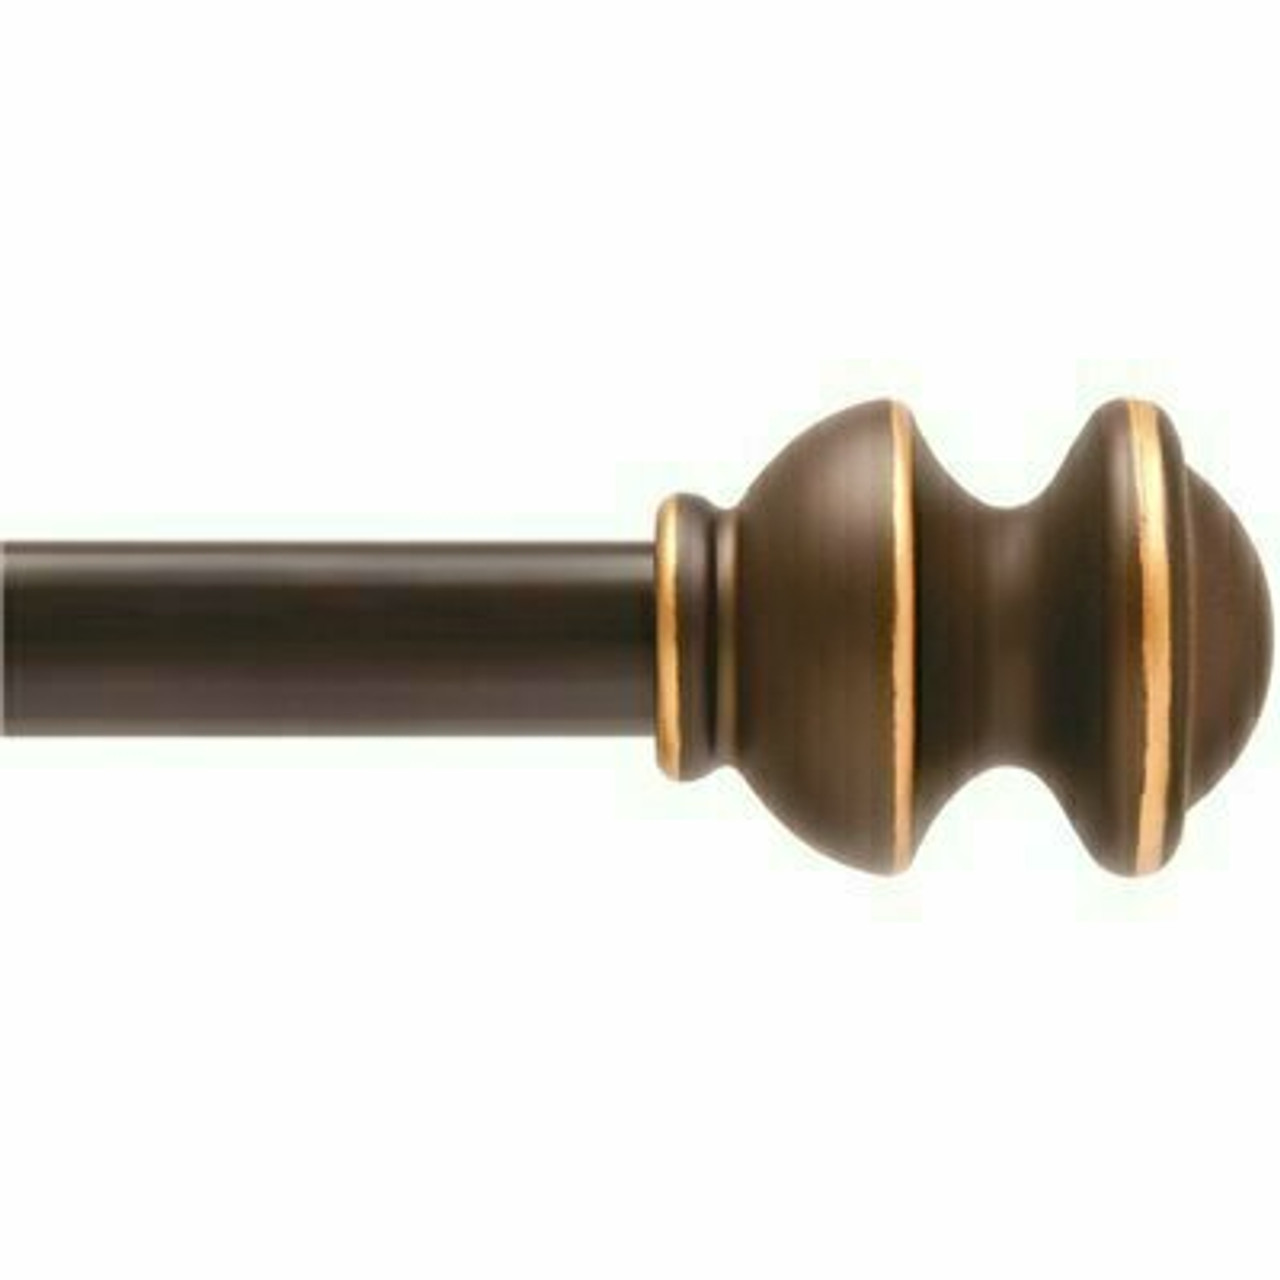 Kenney Kendall 48 In. - 86 In. Adjustable 5/8 Single Standard Decorative Window Curtain Rod In Oil Rubbed Bronze